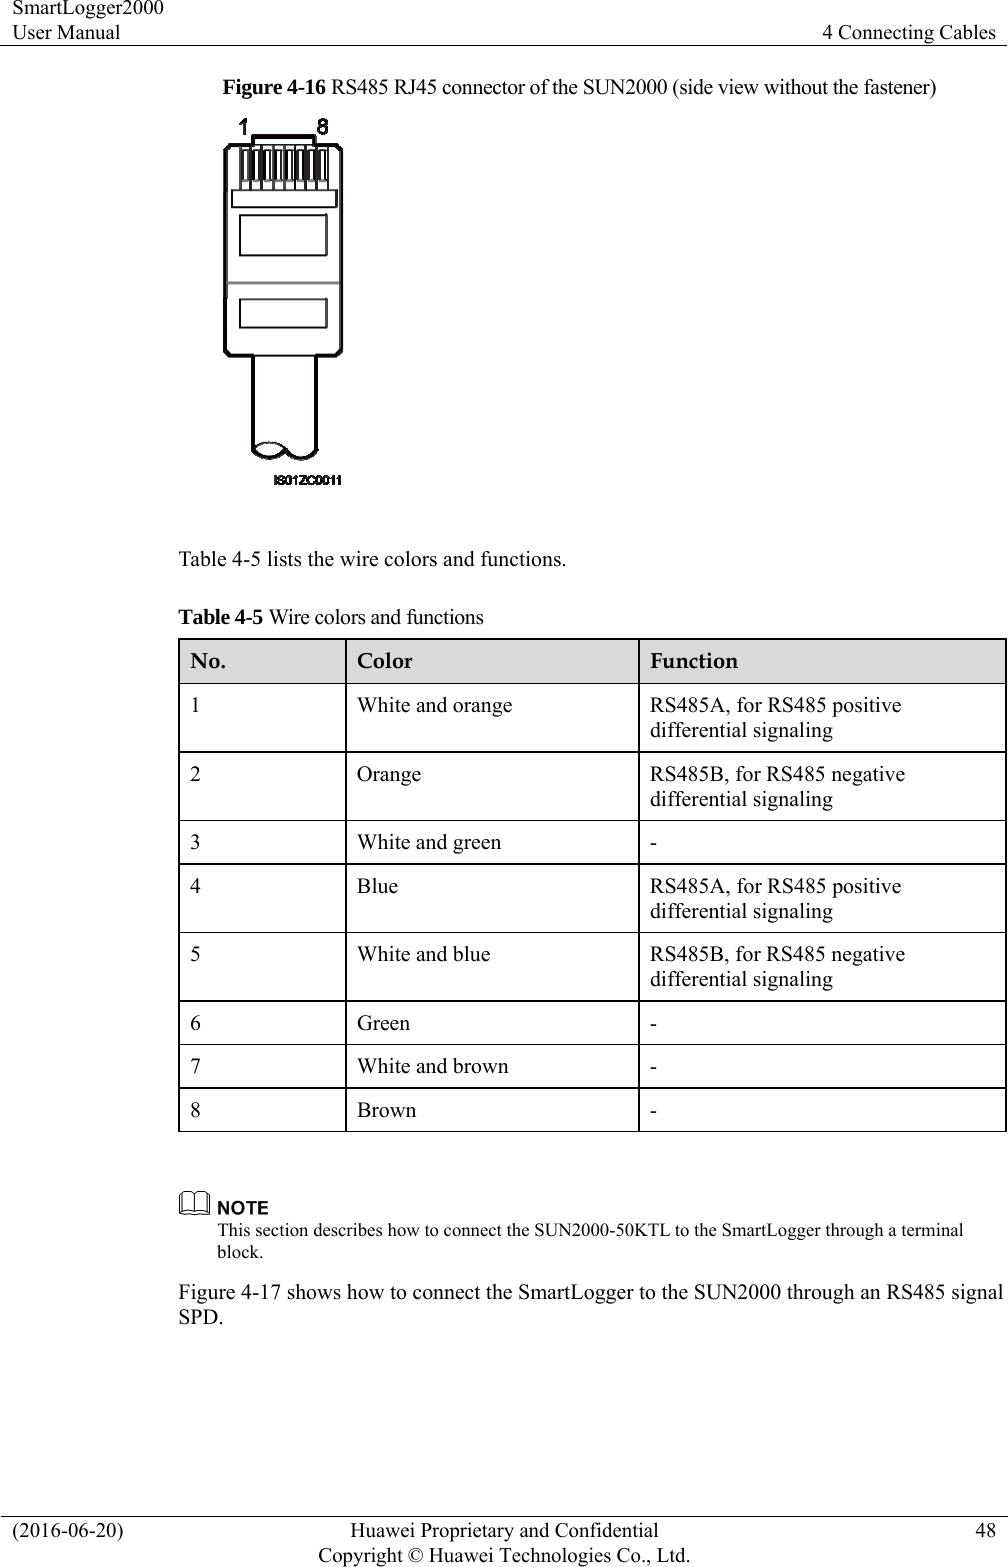 SmartLogger2000 User Manual  4 Connecting Cables (2016-06-20)  Huawei Proprietary and Confidential         Copyright © Huawei Technologies Co., Ltd.48 Figure 4-16 RS485 RJ45 connector of the SUN2000 (side view without the fastener)   Table 4-5 lists the wire colors and functions. Table 4-5 Wire colors and functions No.  Color  Function 1  White and orange  RS485A, for RS485 positive differential signaling 2  Orange  RS485B, for RS485 negative differential signaling 3 White and green - 4  Blue  RS485A, for RS485 positive differential signaling 5  White and blue  RS485B, for RS485 negative differential signaling 6 Green  - 7 White and brown - 8 Brown  -   This section describes how to connect the SUN2000-50KTL to the SmartLogger through a terminal block.  Figure 4-17 shows how to connect the SmartLogger to the SUN2000 through an RS485 signal SPD. 